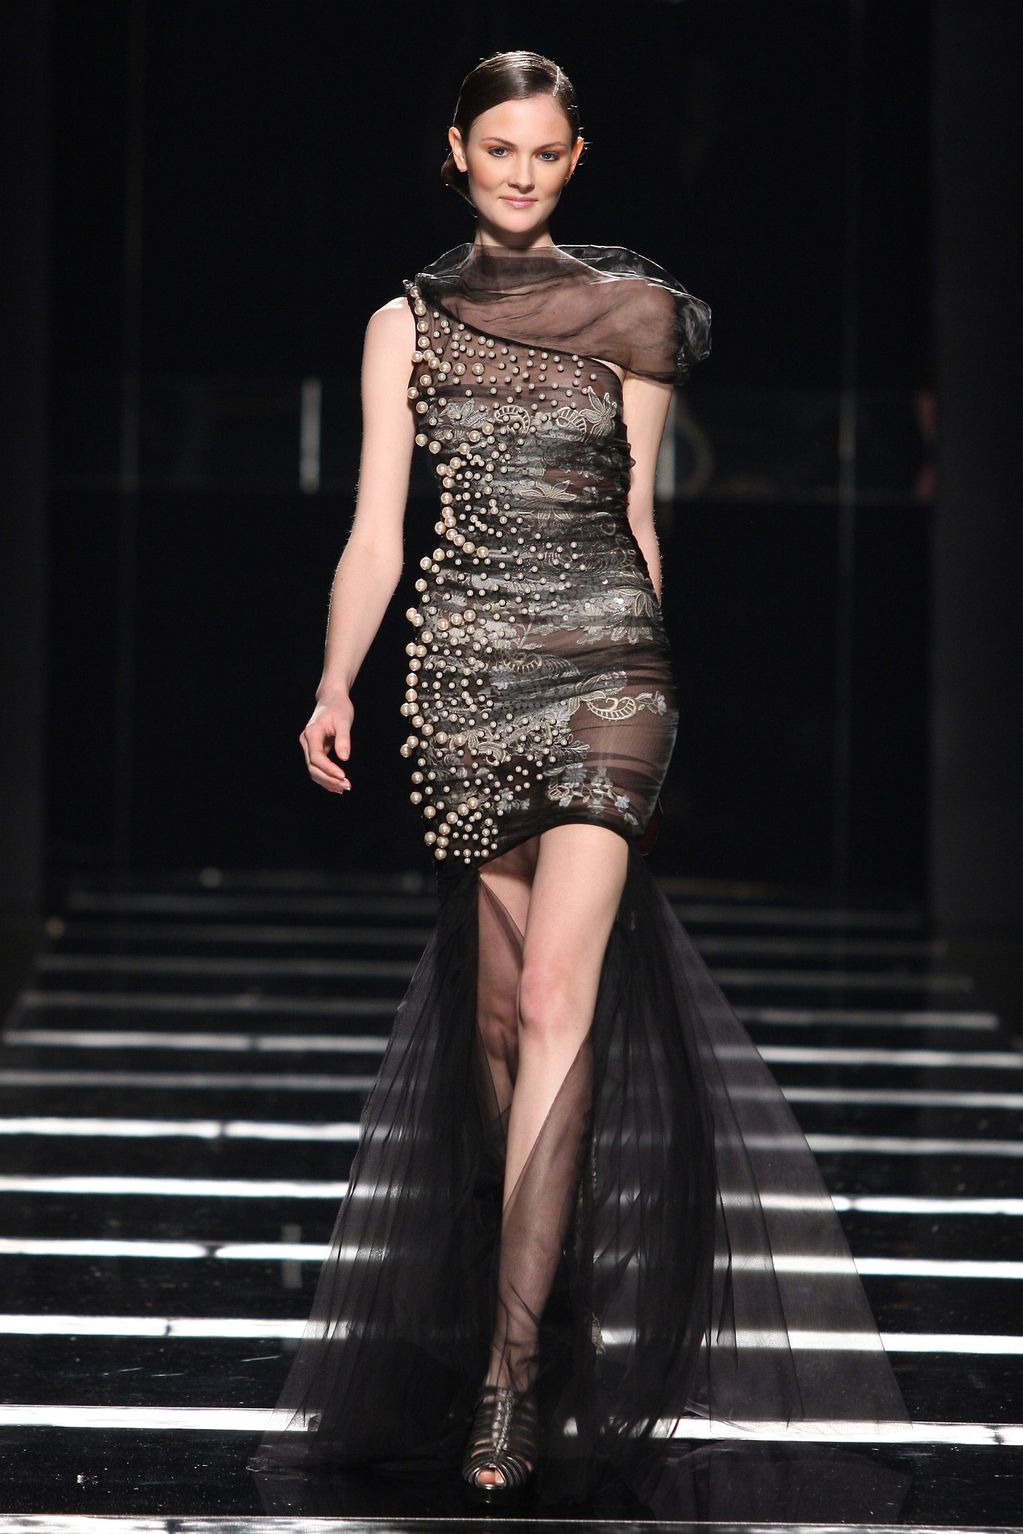 My Fashion Obsession: Haute Couture Spring 2011: TONY WARD